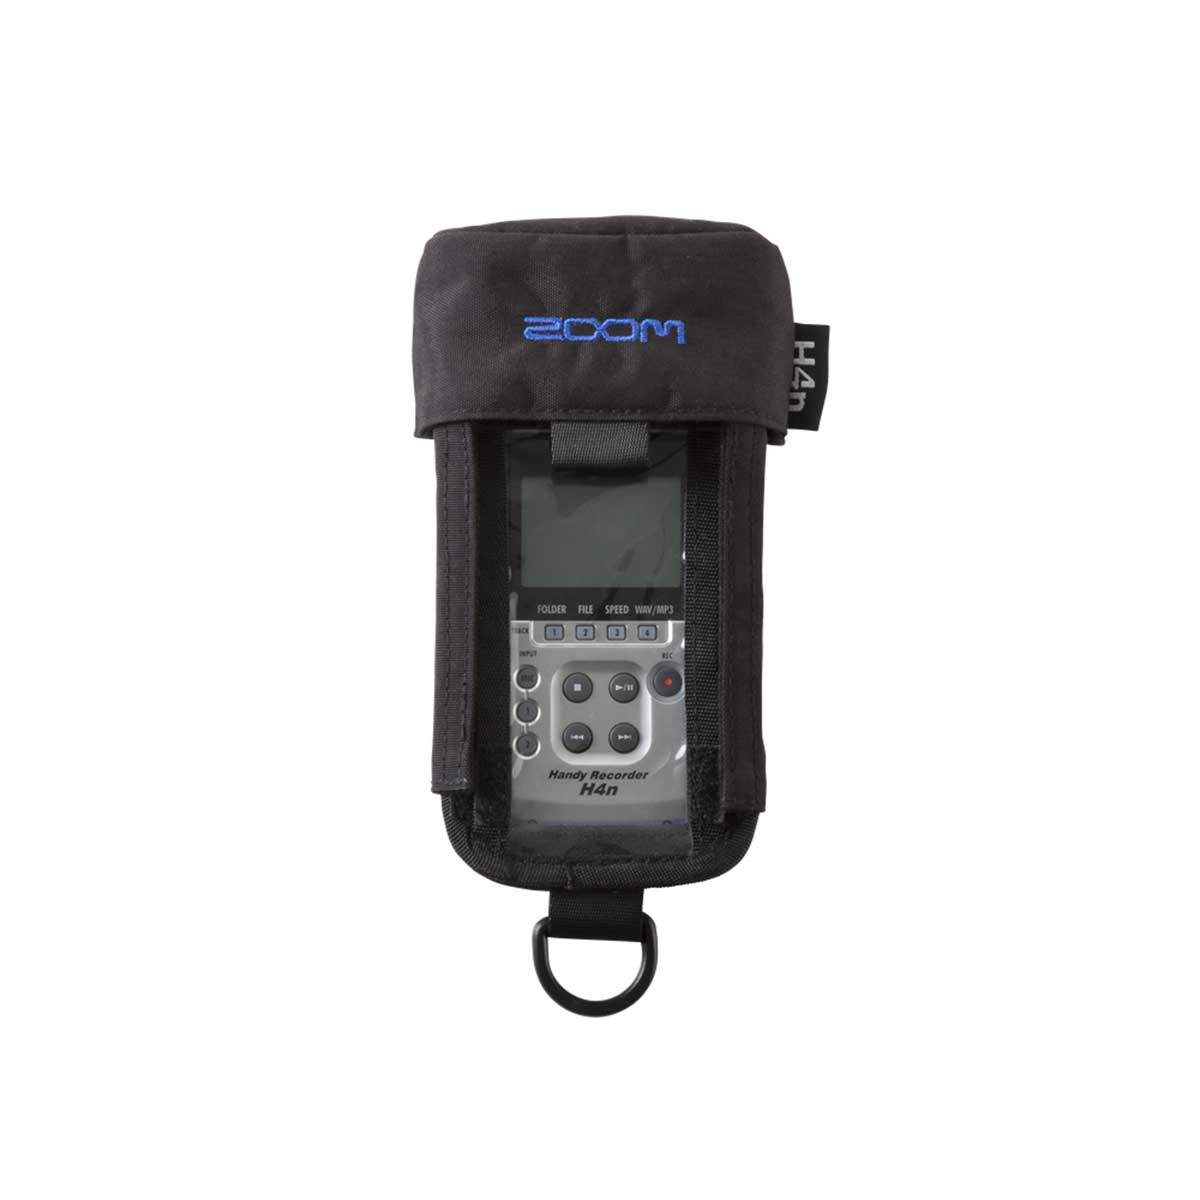 Zoom PCH-4n Protective Case for H4n